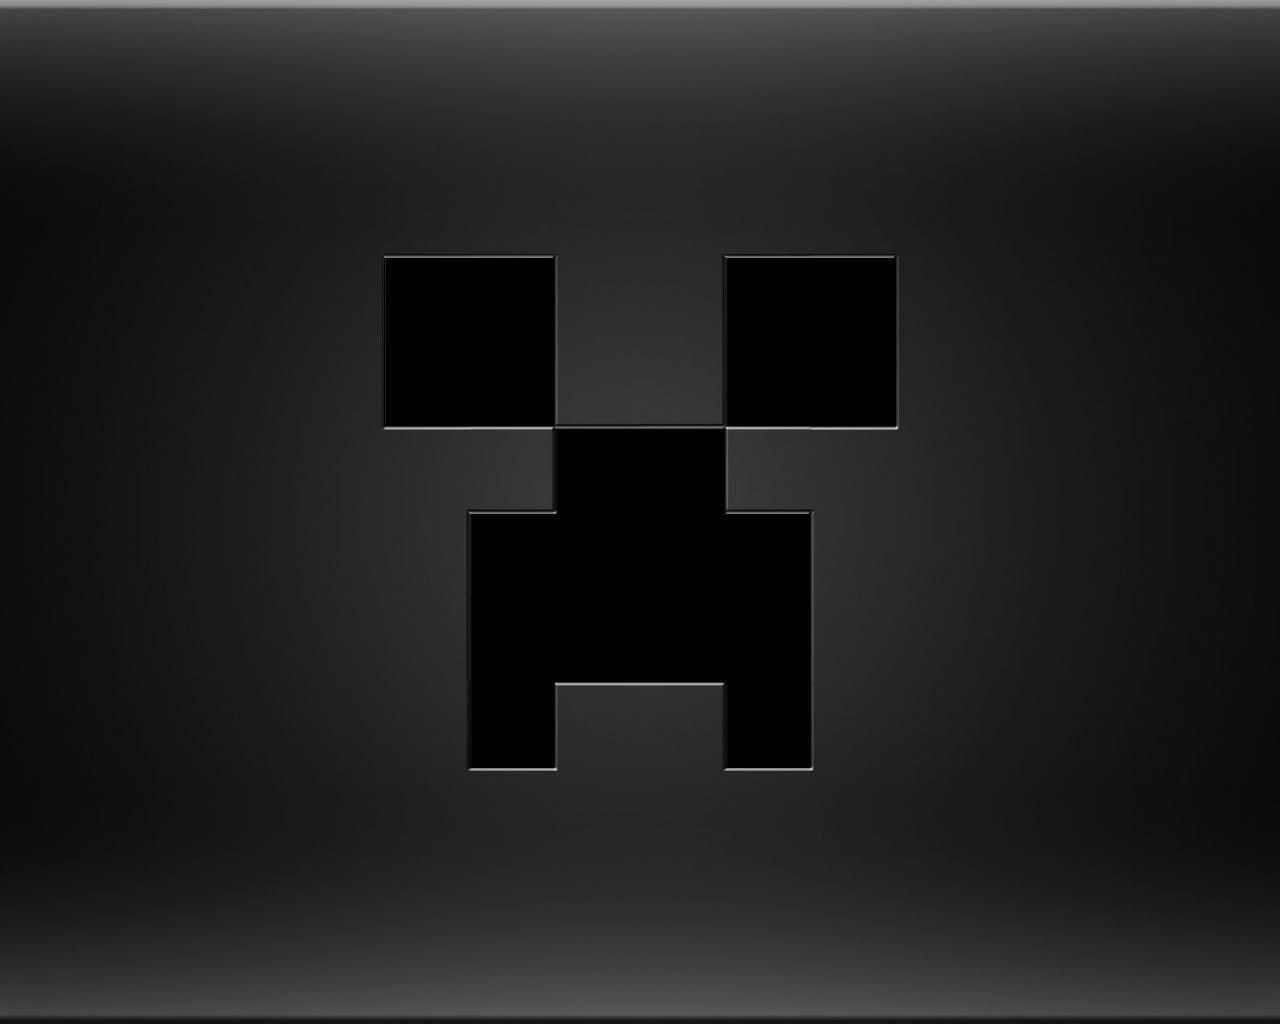 Minecraft wallpaper 1920x1080 - - High Quality and other